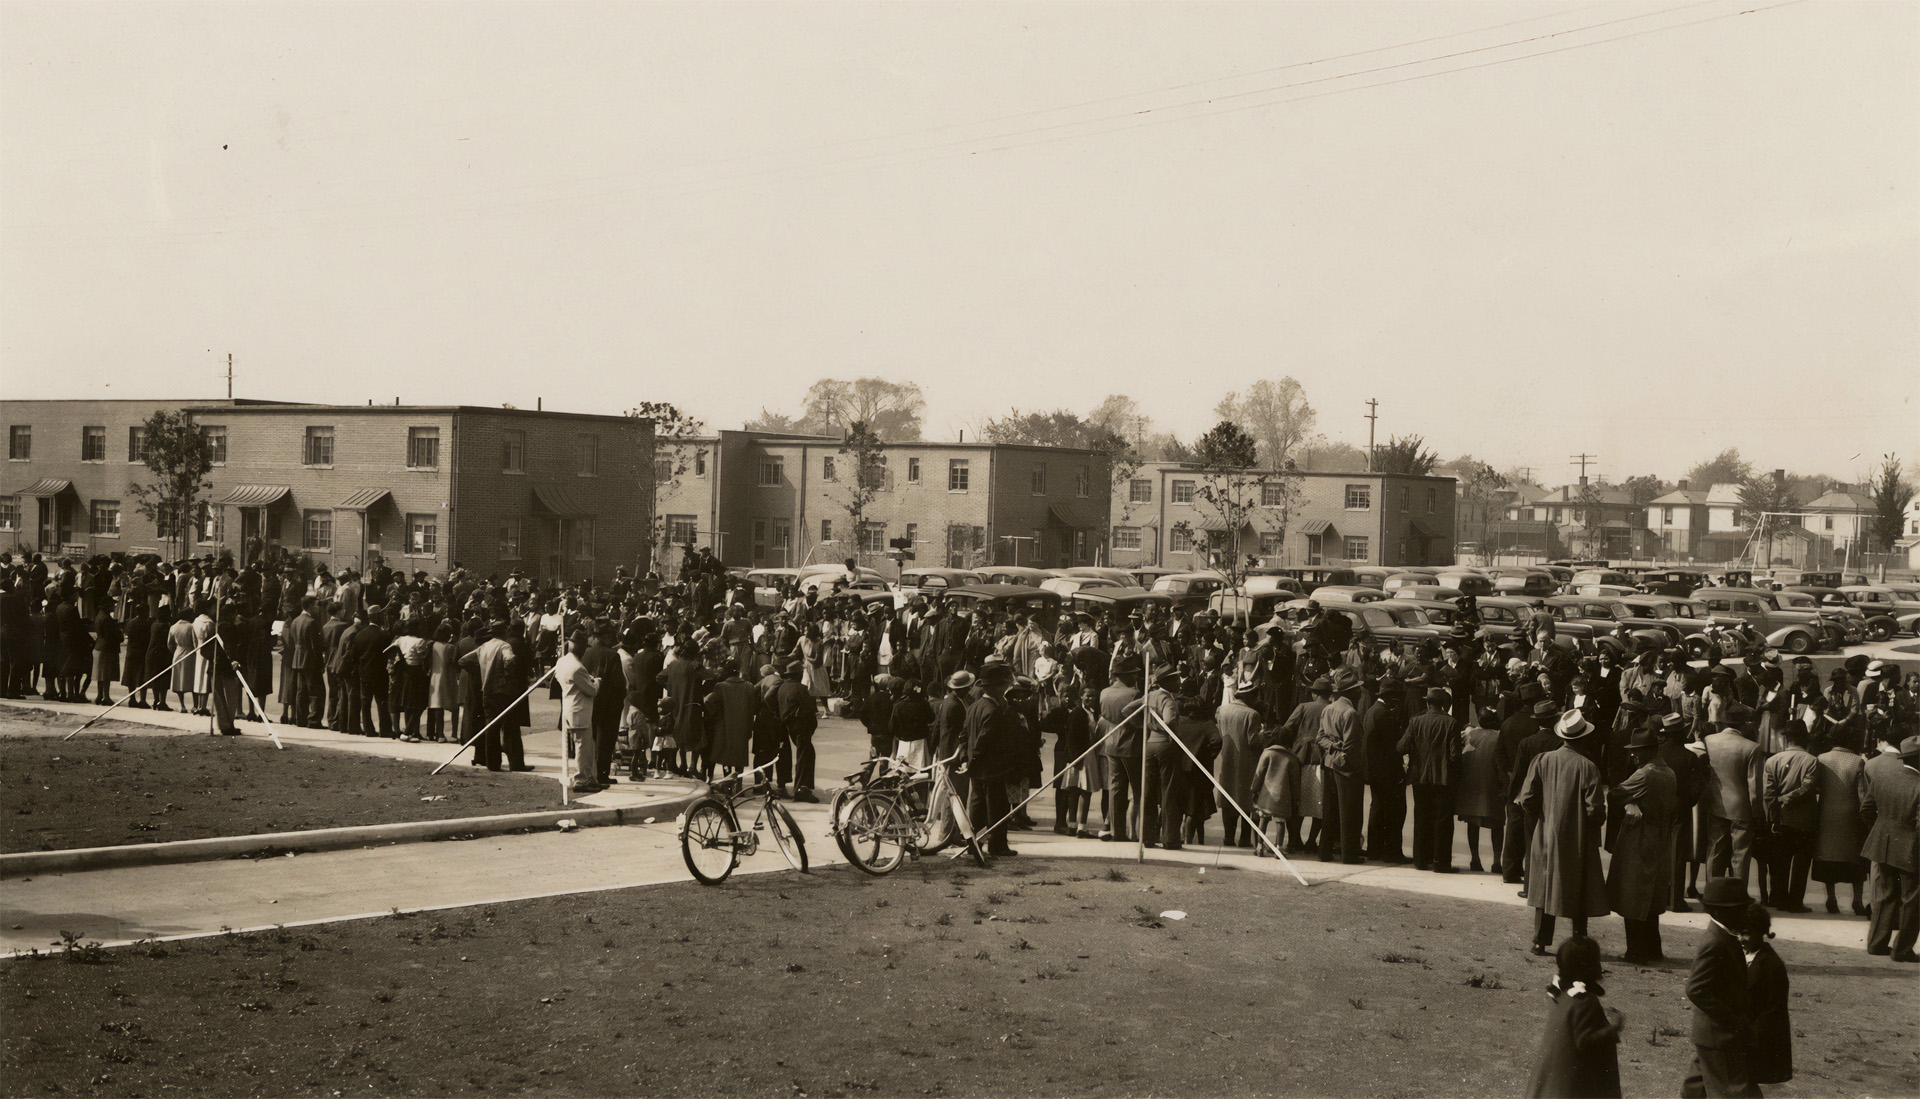 Poindexter Village, a crowd gathers to see the finished housing and if it indeed had the amenities promised in its promotion.